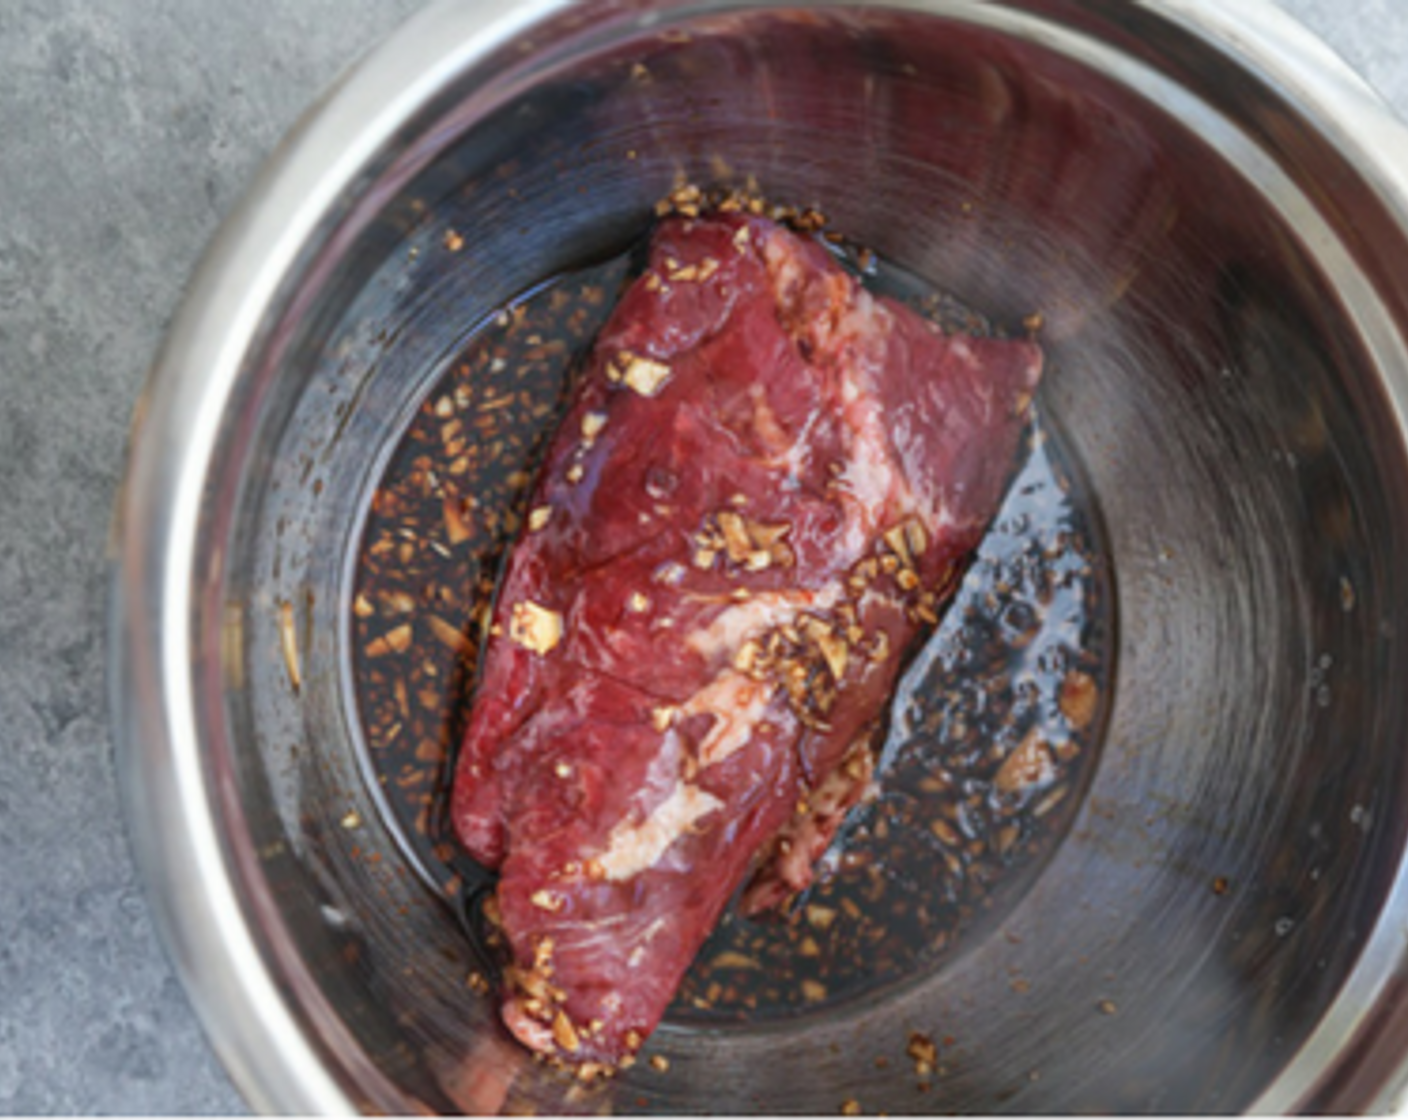 step 1 To marinate the beef, in a large zip-lock bag or bowl, combine the Gluten-Free Tamari Soy Sauce (3/4 cup), Rice Vinegar (1/2 cup), Honey (2 Tbsp), Gochujang (1 Tbsp), Fresh Ginger (1 in) Garlic (2 cloves), and Dark Sesame Oil (2 Tbsp). Add the Skirt Steak (1.5 lb) and toss to coat. Marinate for at least 30 minutes, or overnight.